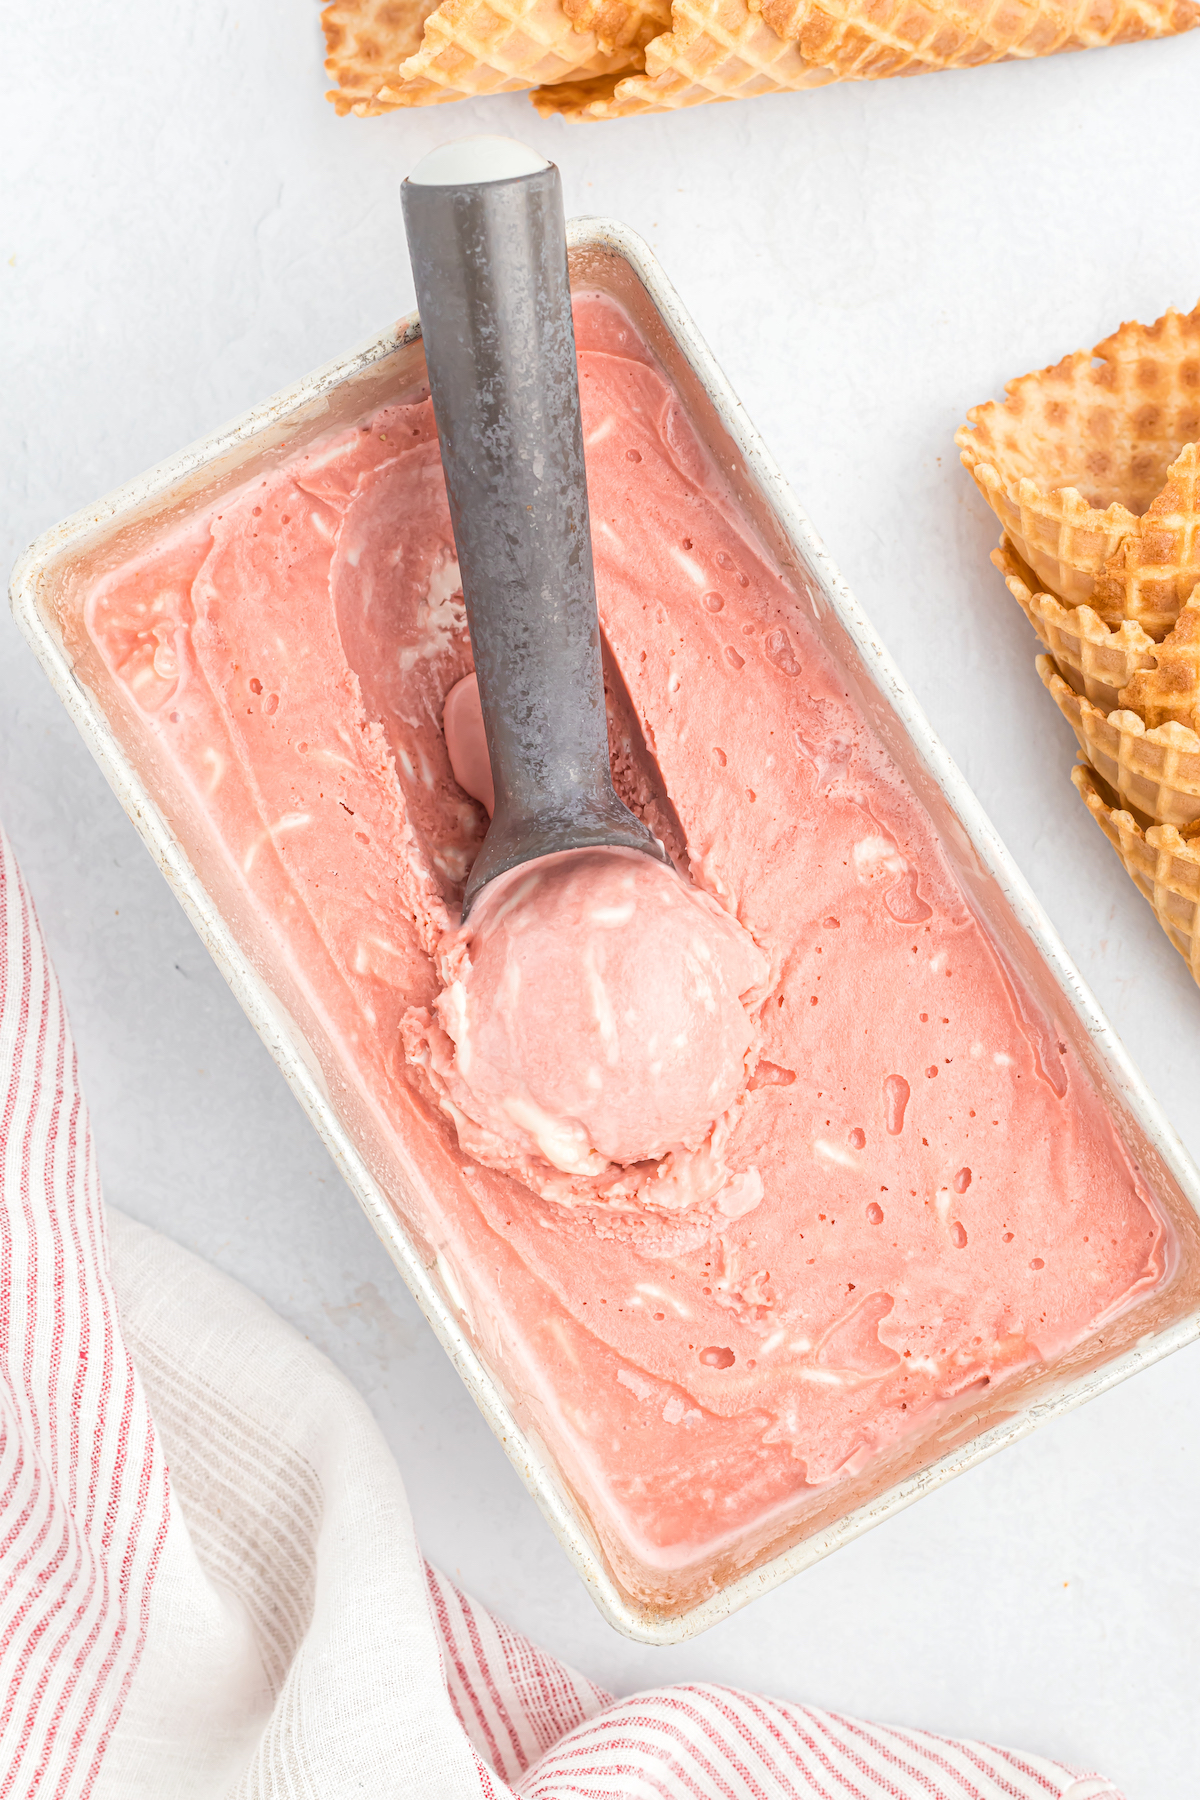 A red colored ice cream being scooped to serve in a waffle cone